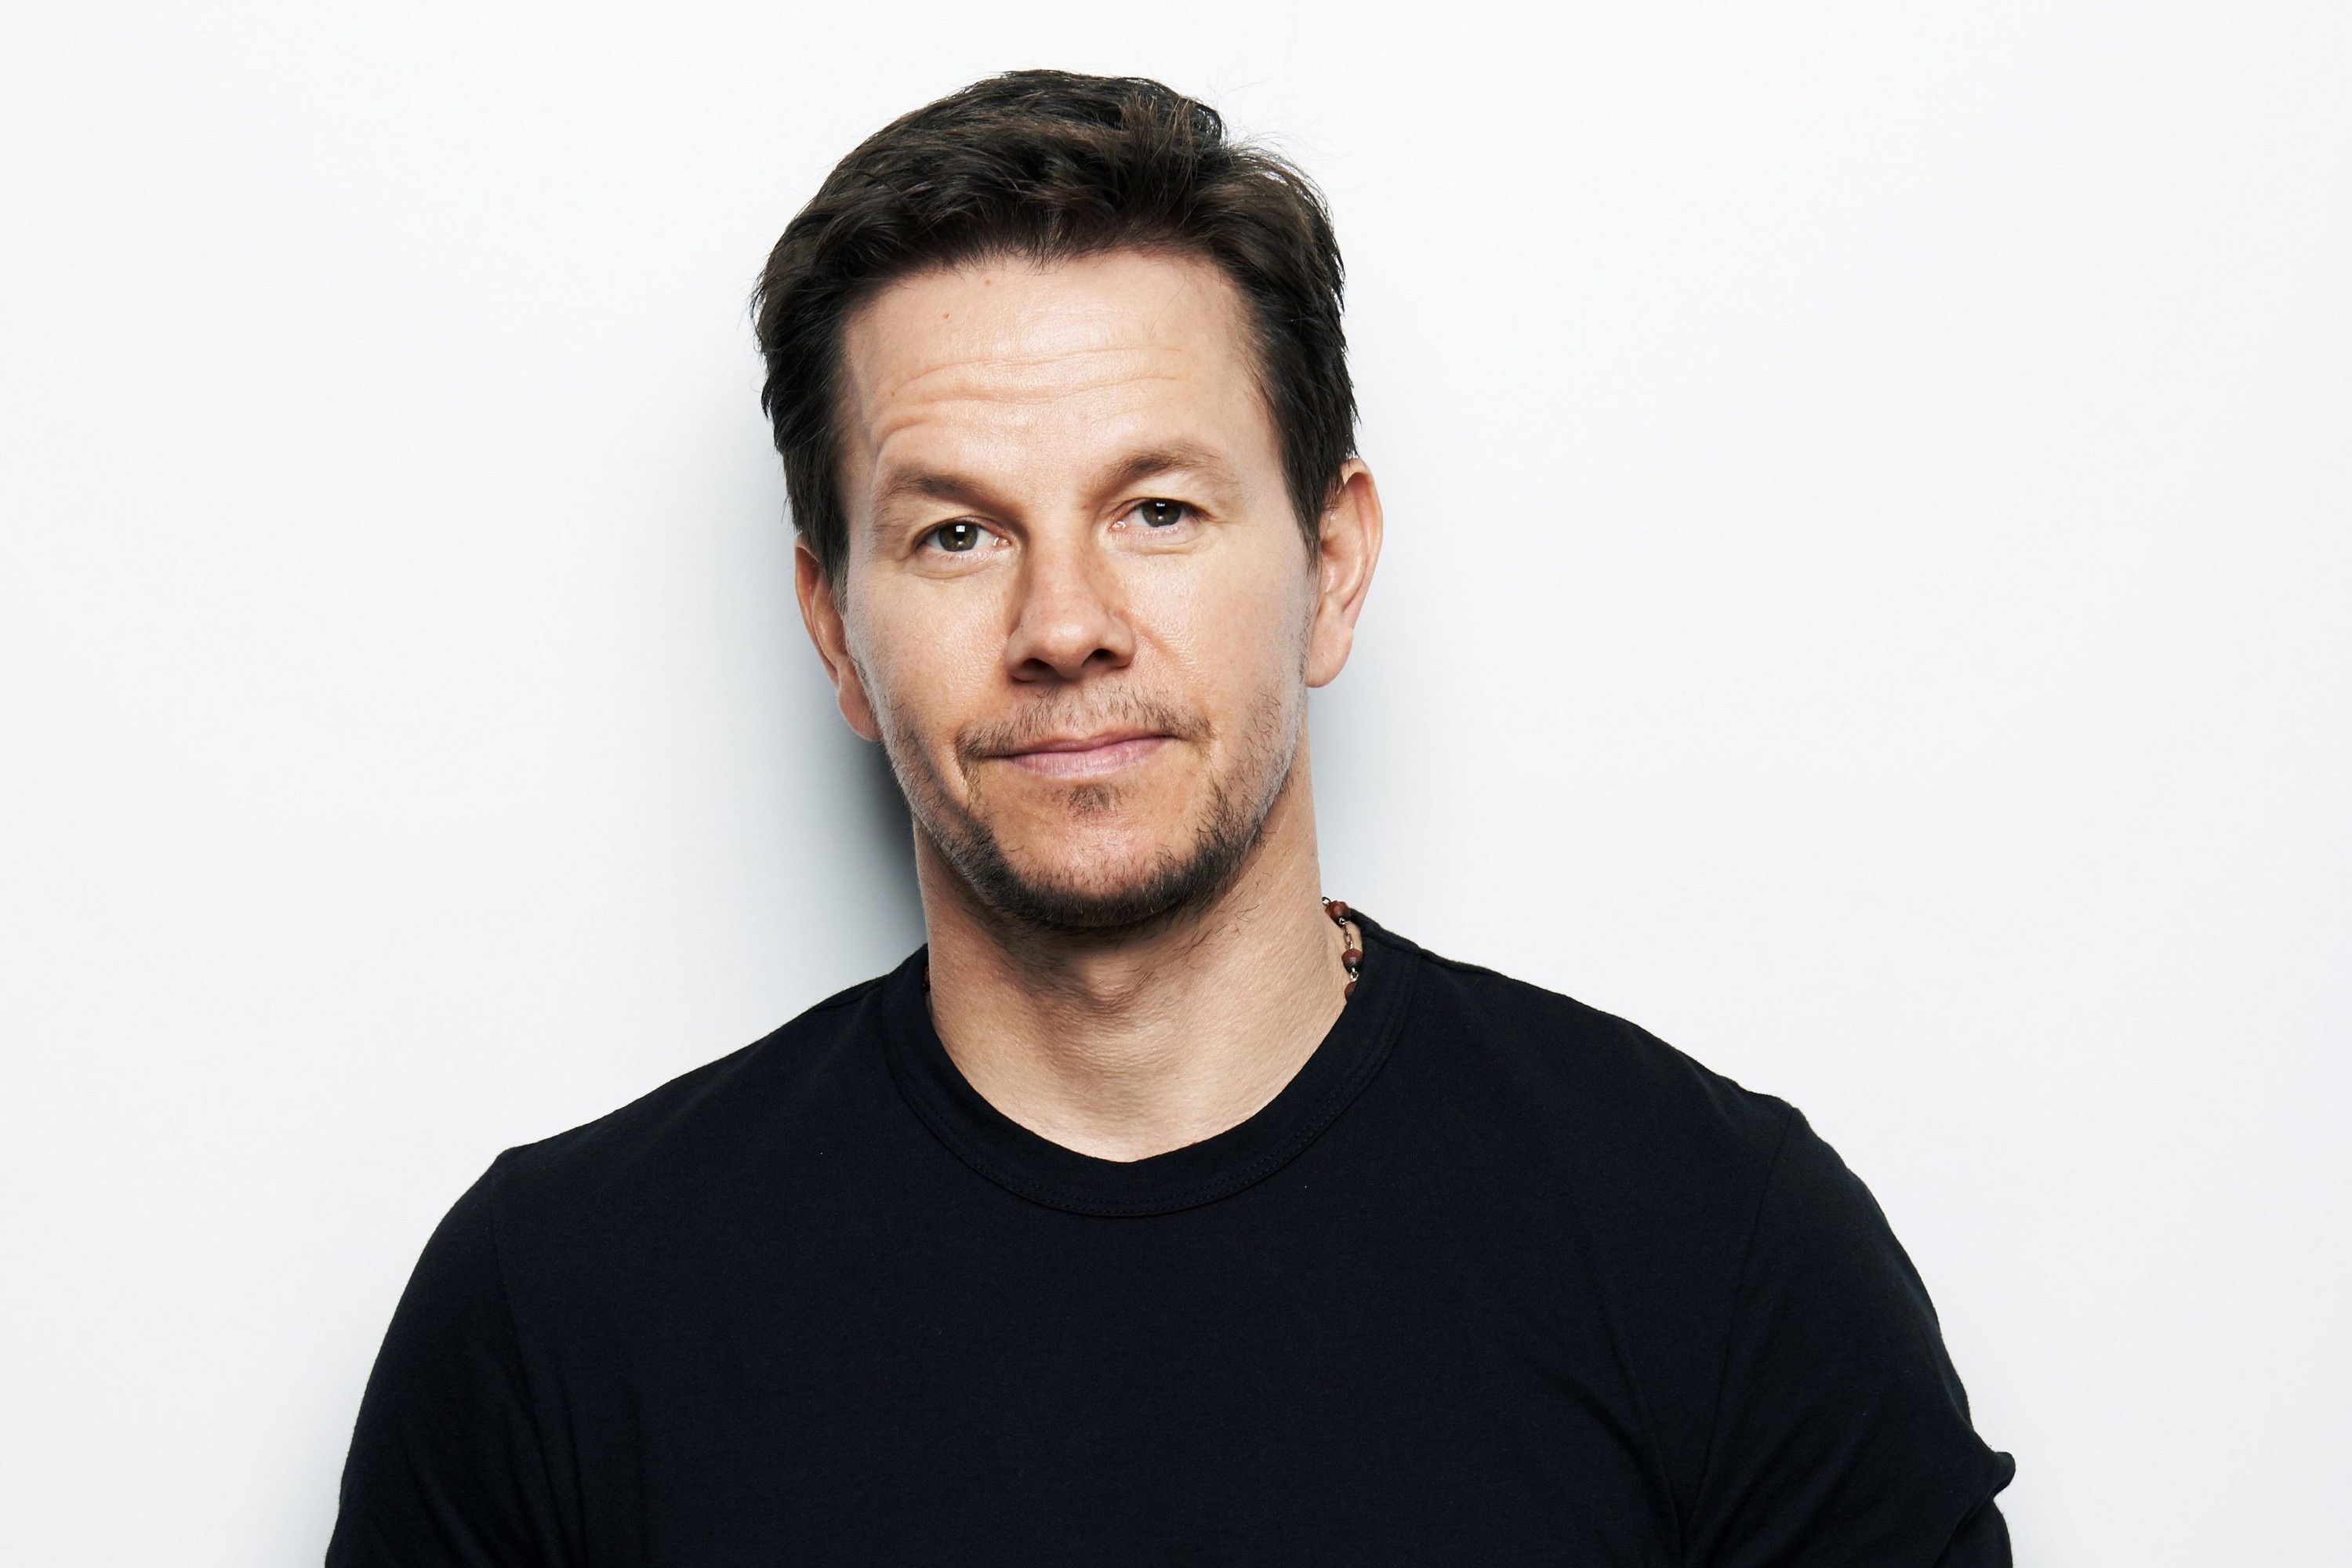 mark wahlberg wallpaper for iphone